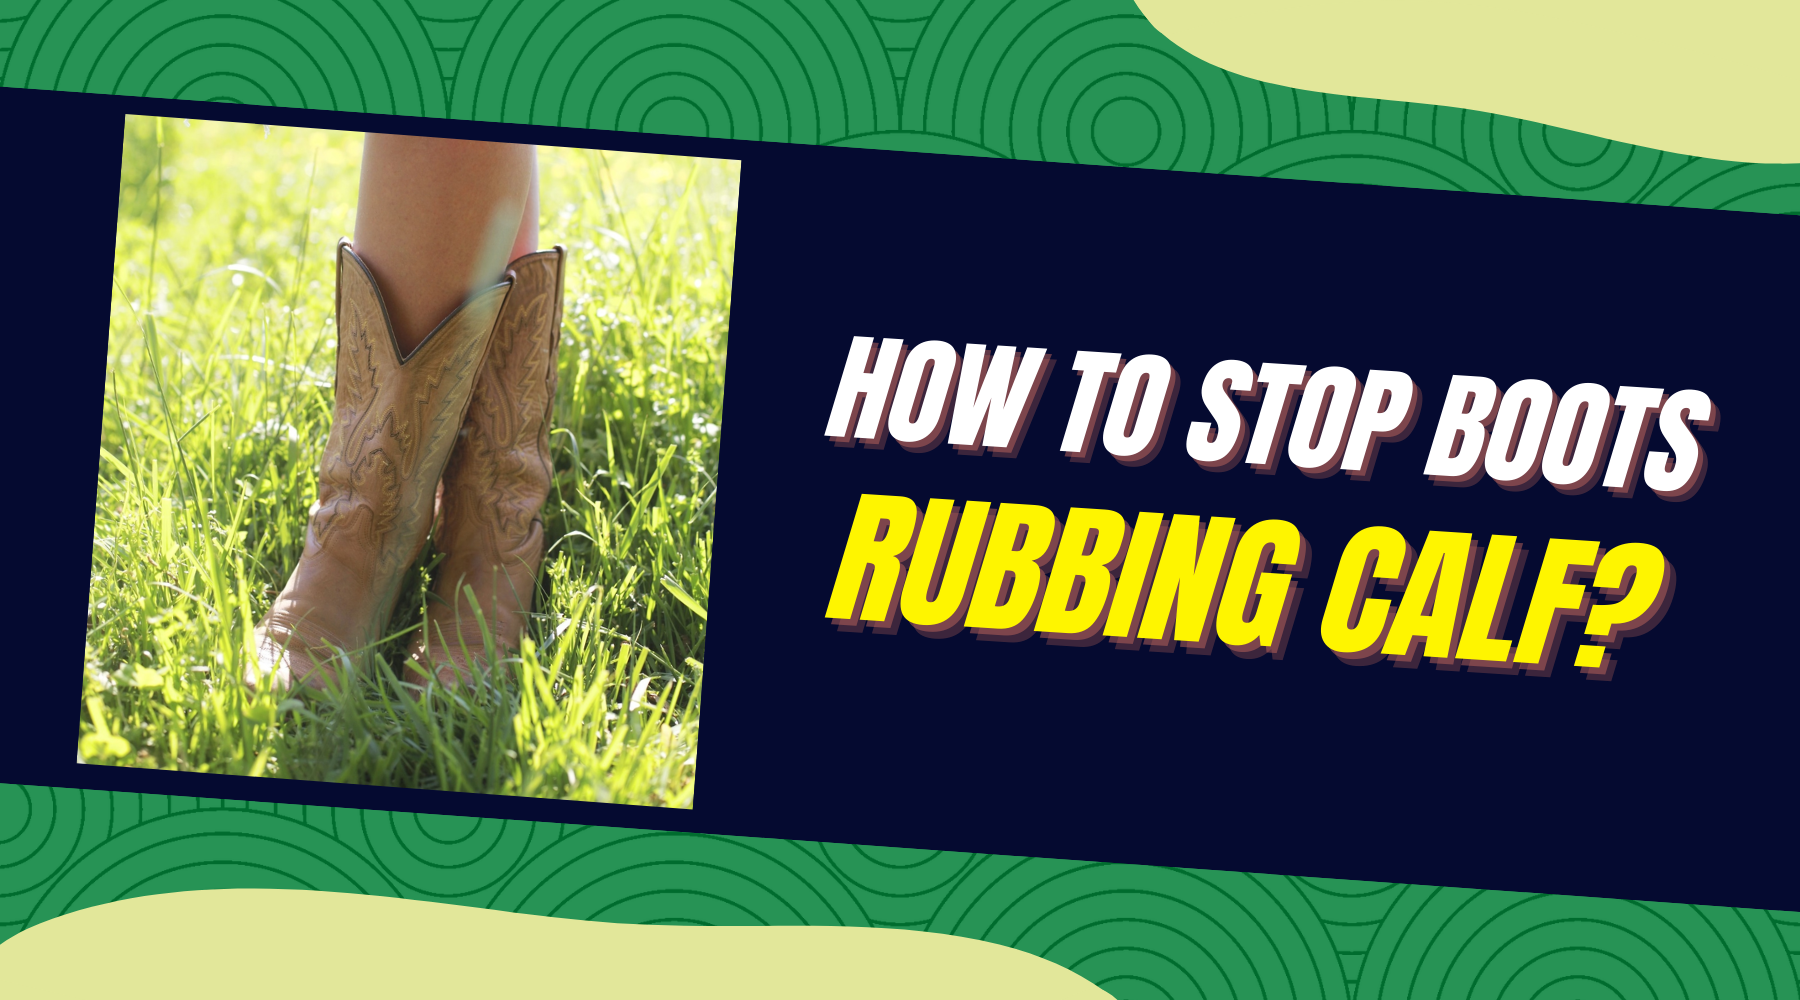 How To Stop Boots Rubbing Calf?